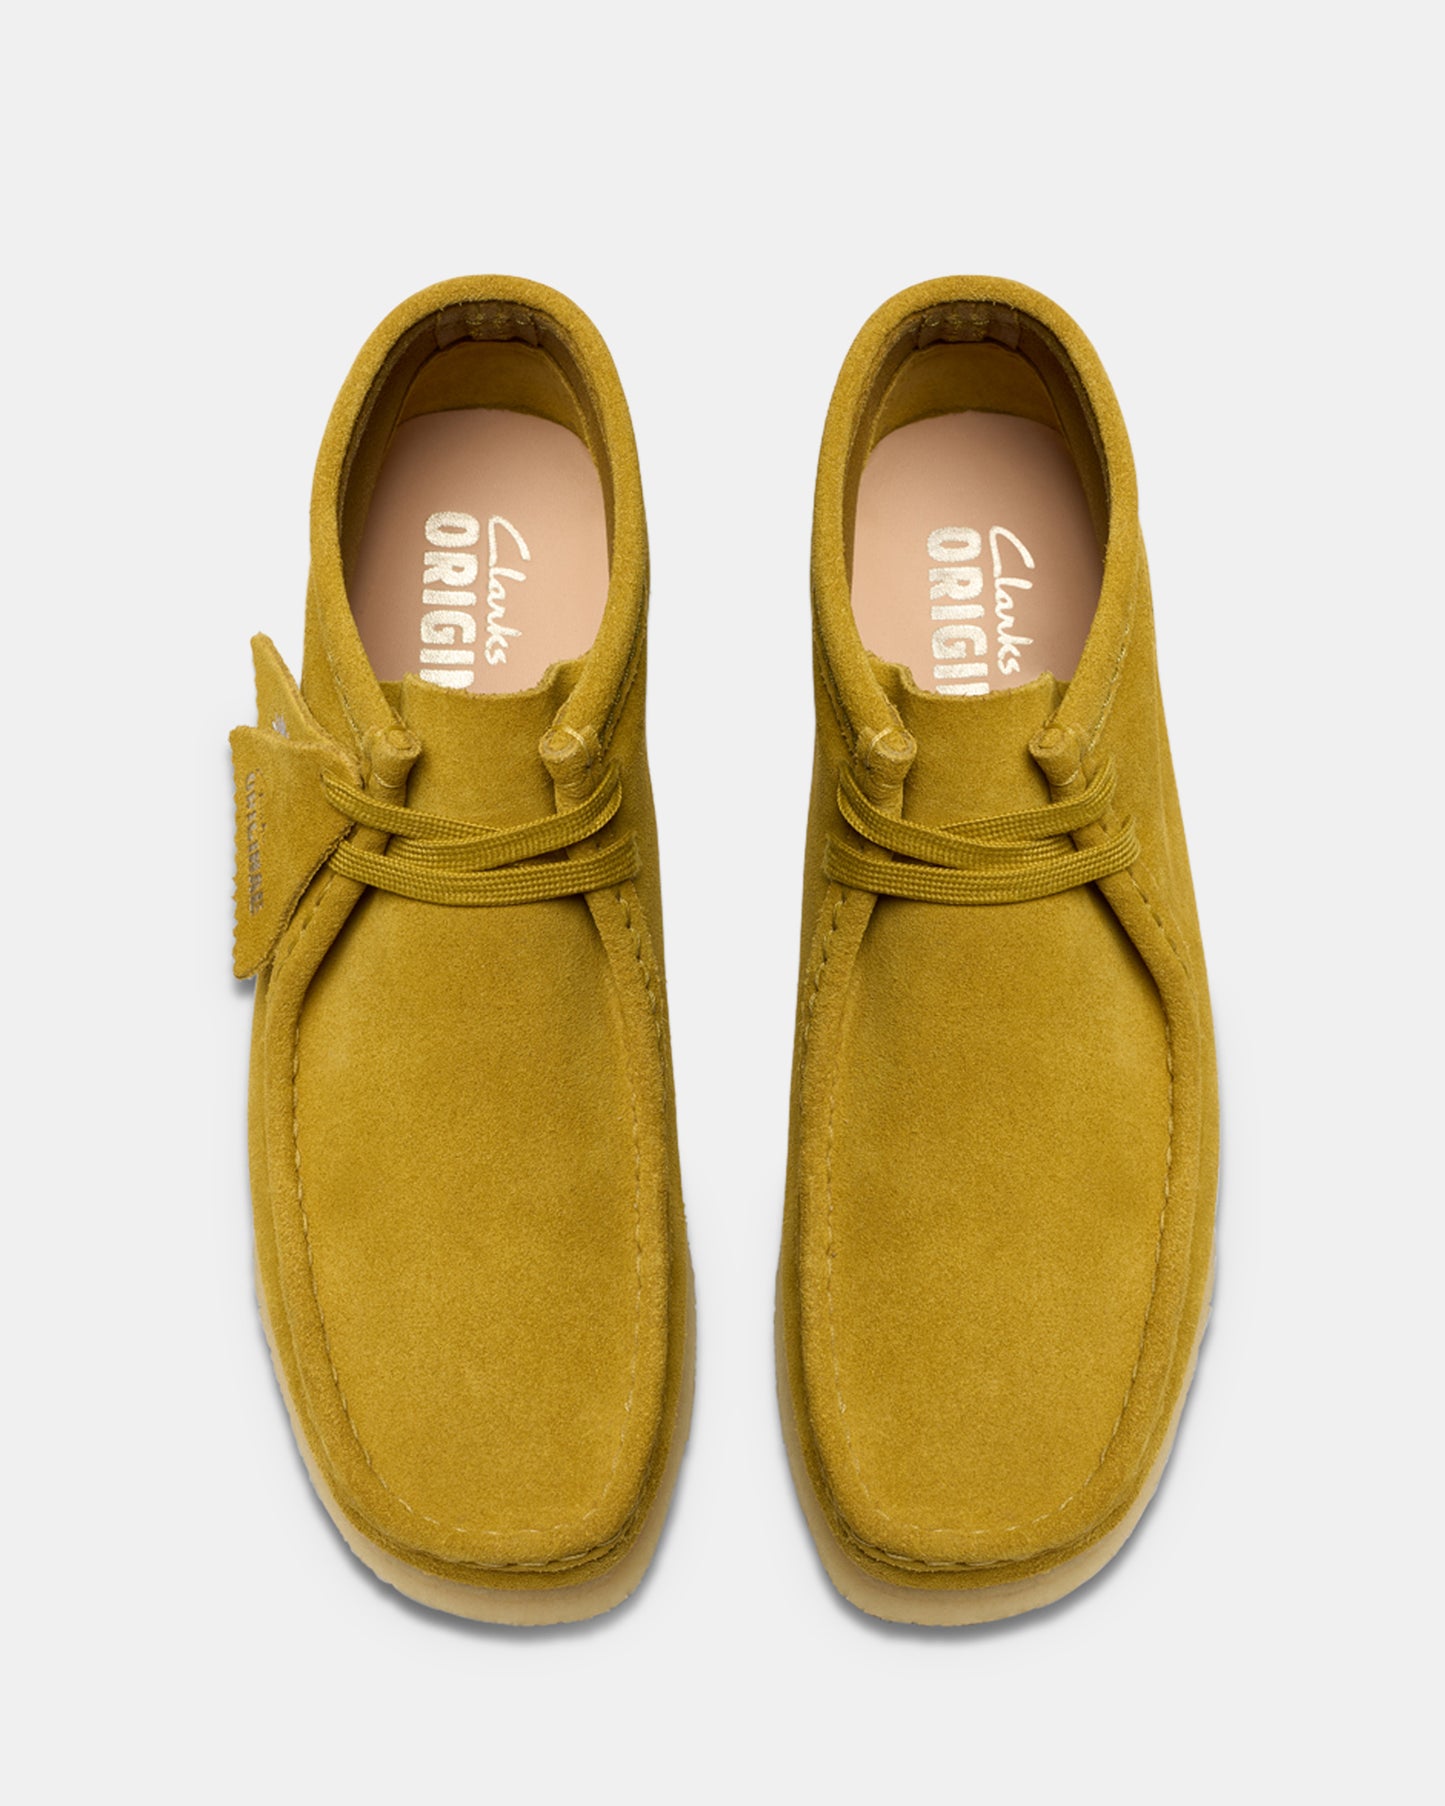 Wallabee Boot. (W) Olive Suede